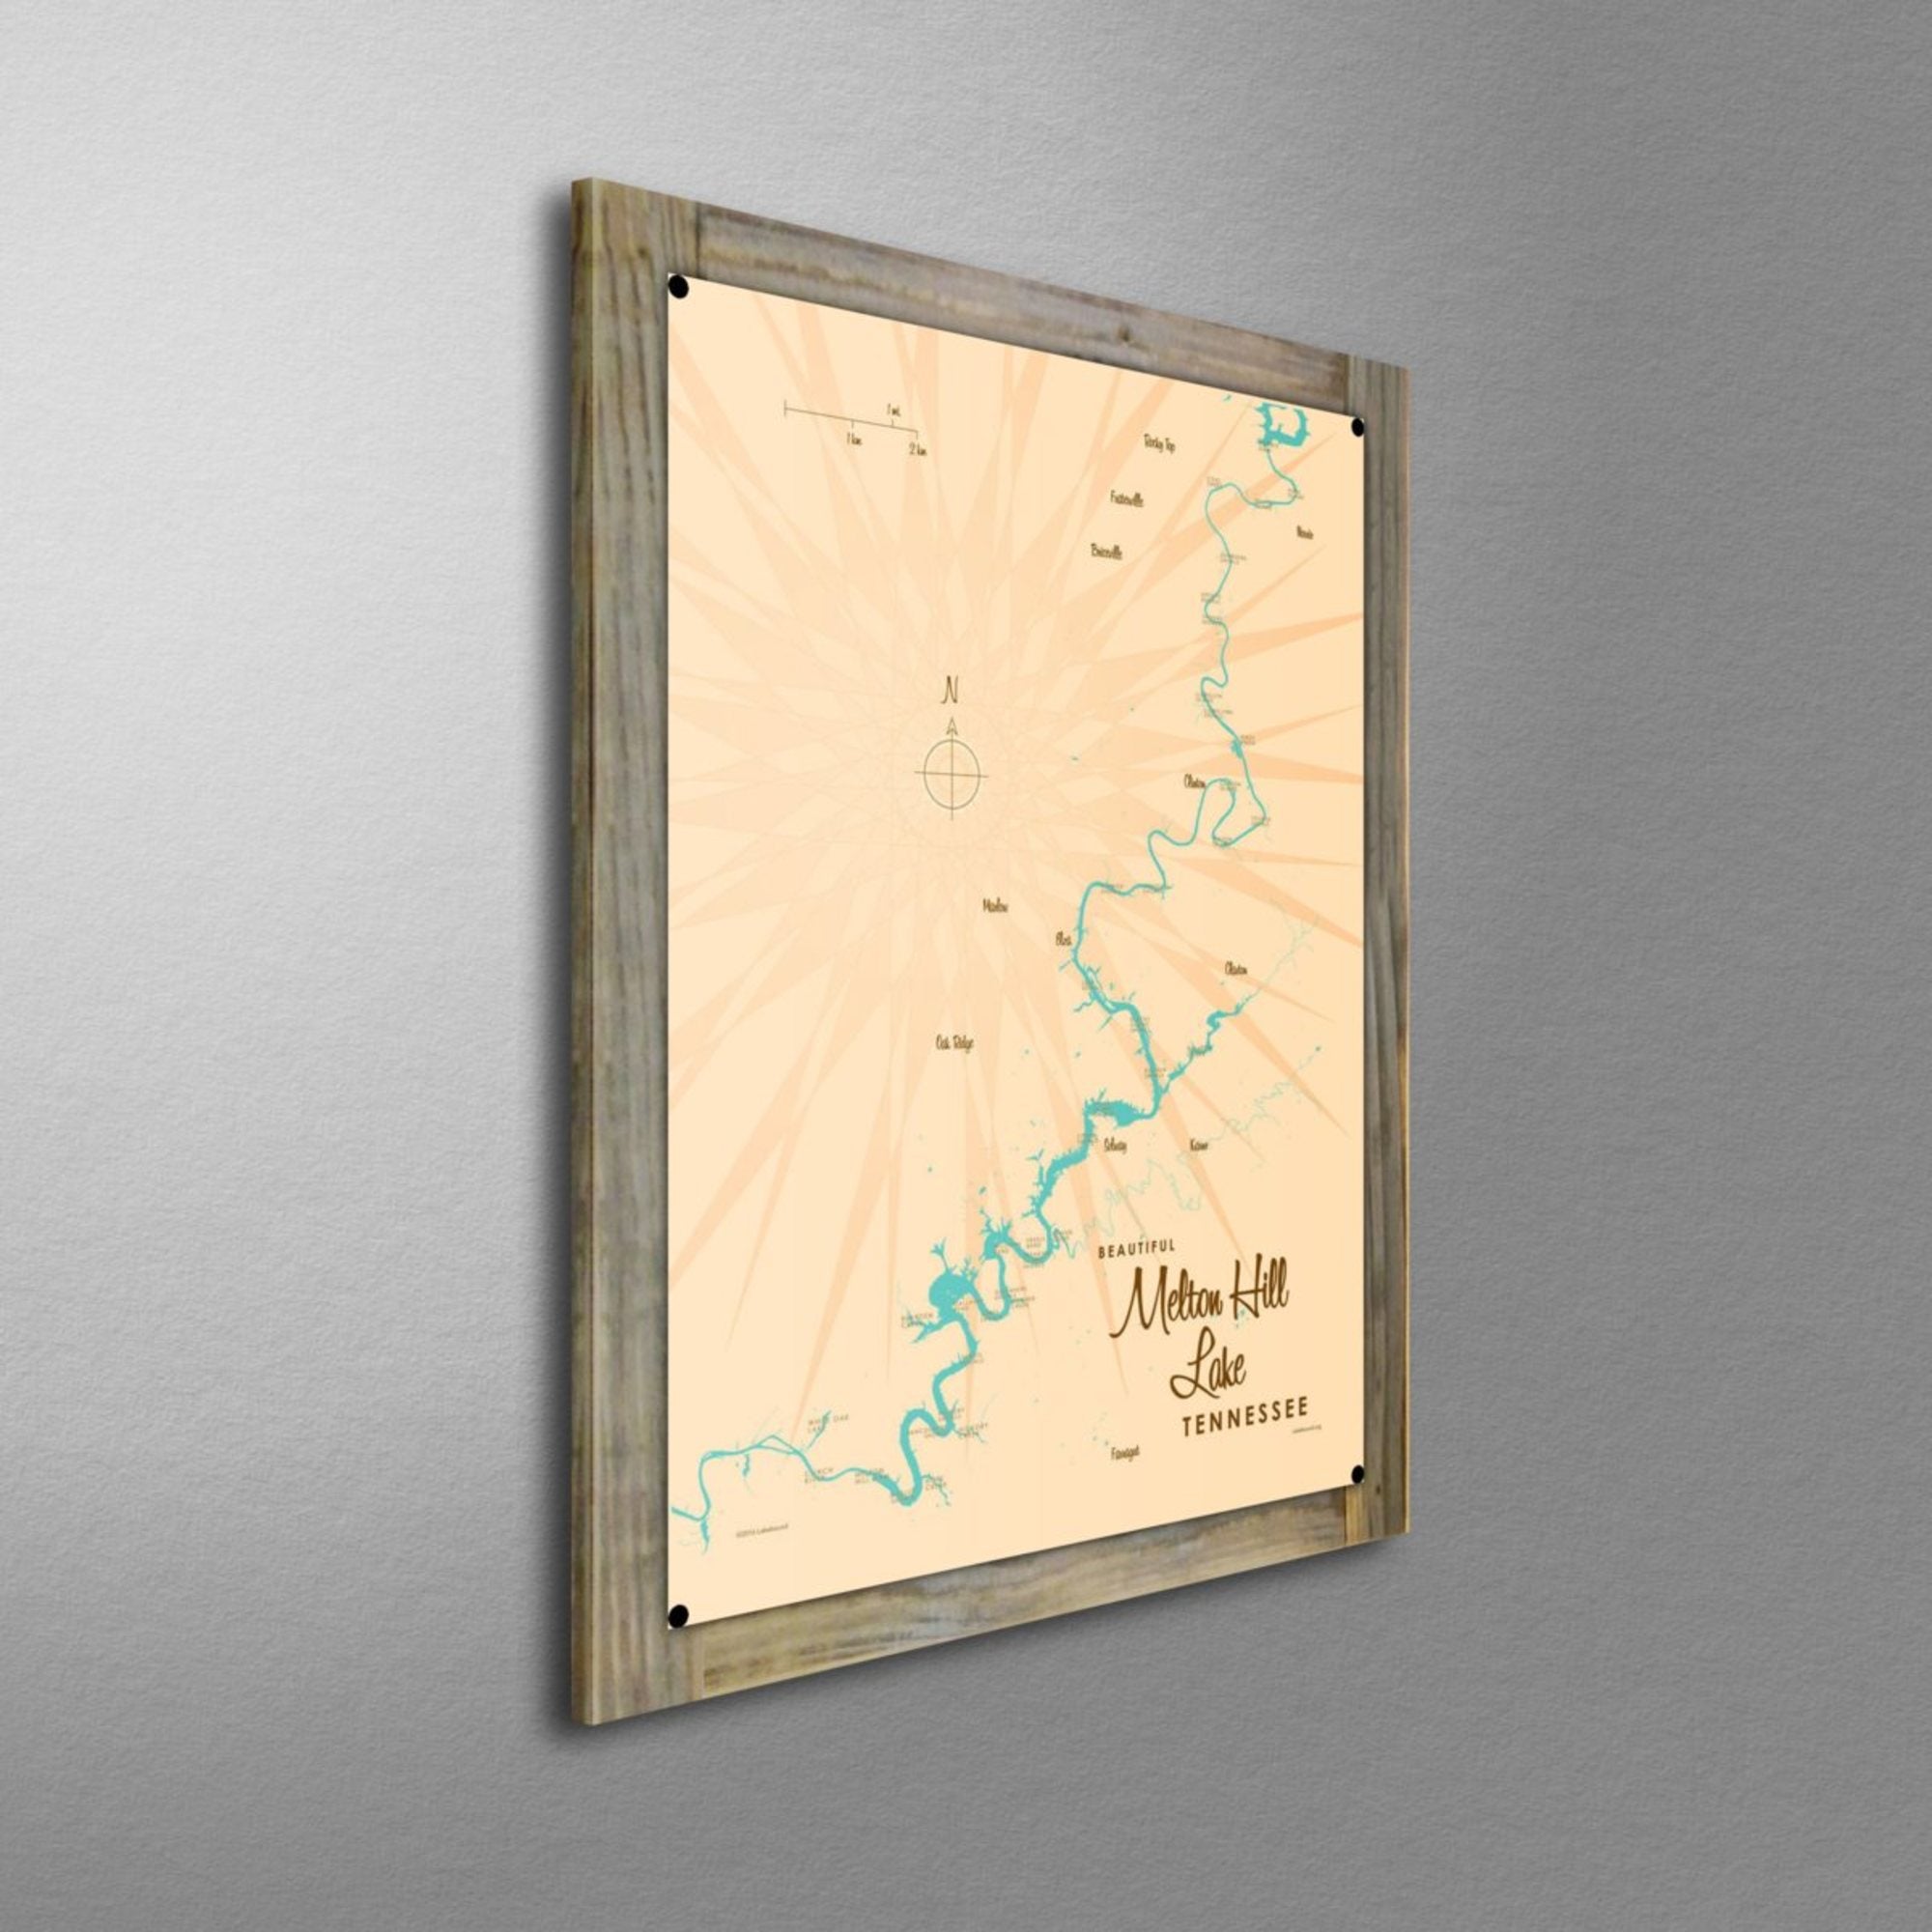 Melton Hill Lake Tennessee, Wood-Mounted Metal Sign Map Art